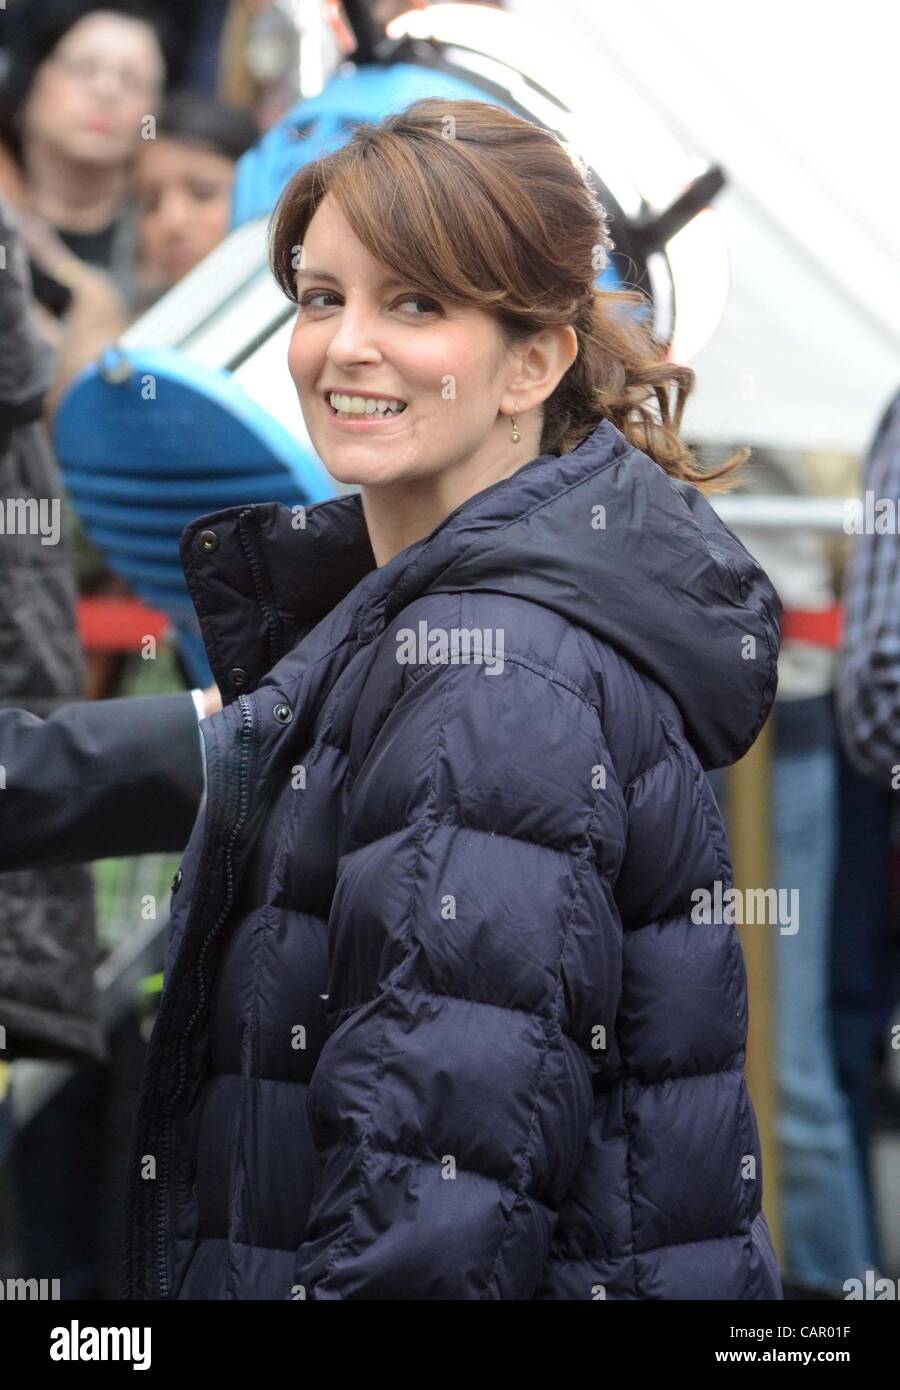 Tina Fey on location film shoot for 30 ROCK Filiming On Location, 30 Rockefeller Center, New York, NB April 9, 2012. Photo By: Derek Storm/Everett Collection Stock Photo